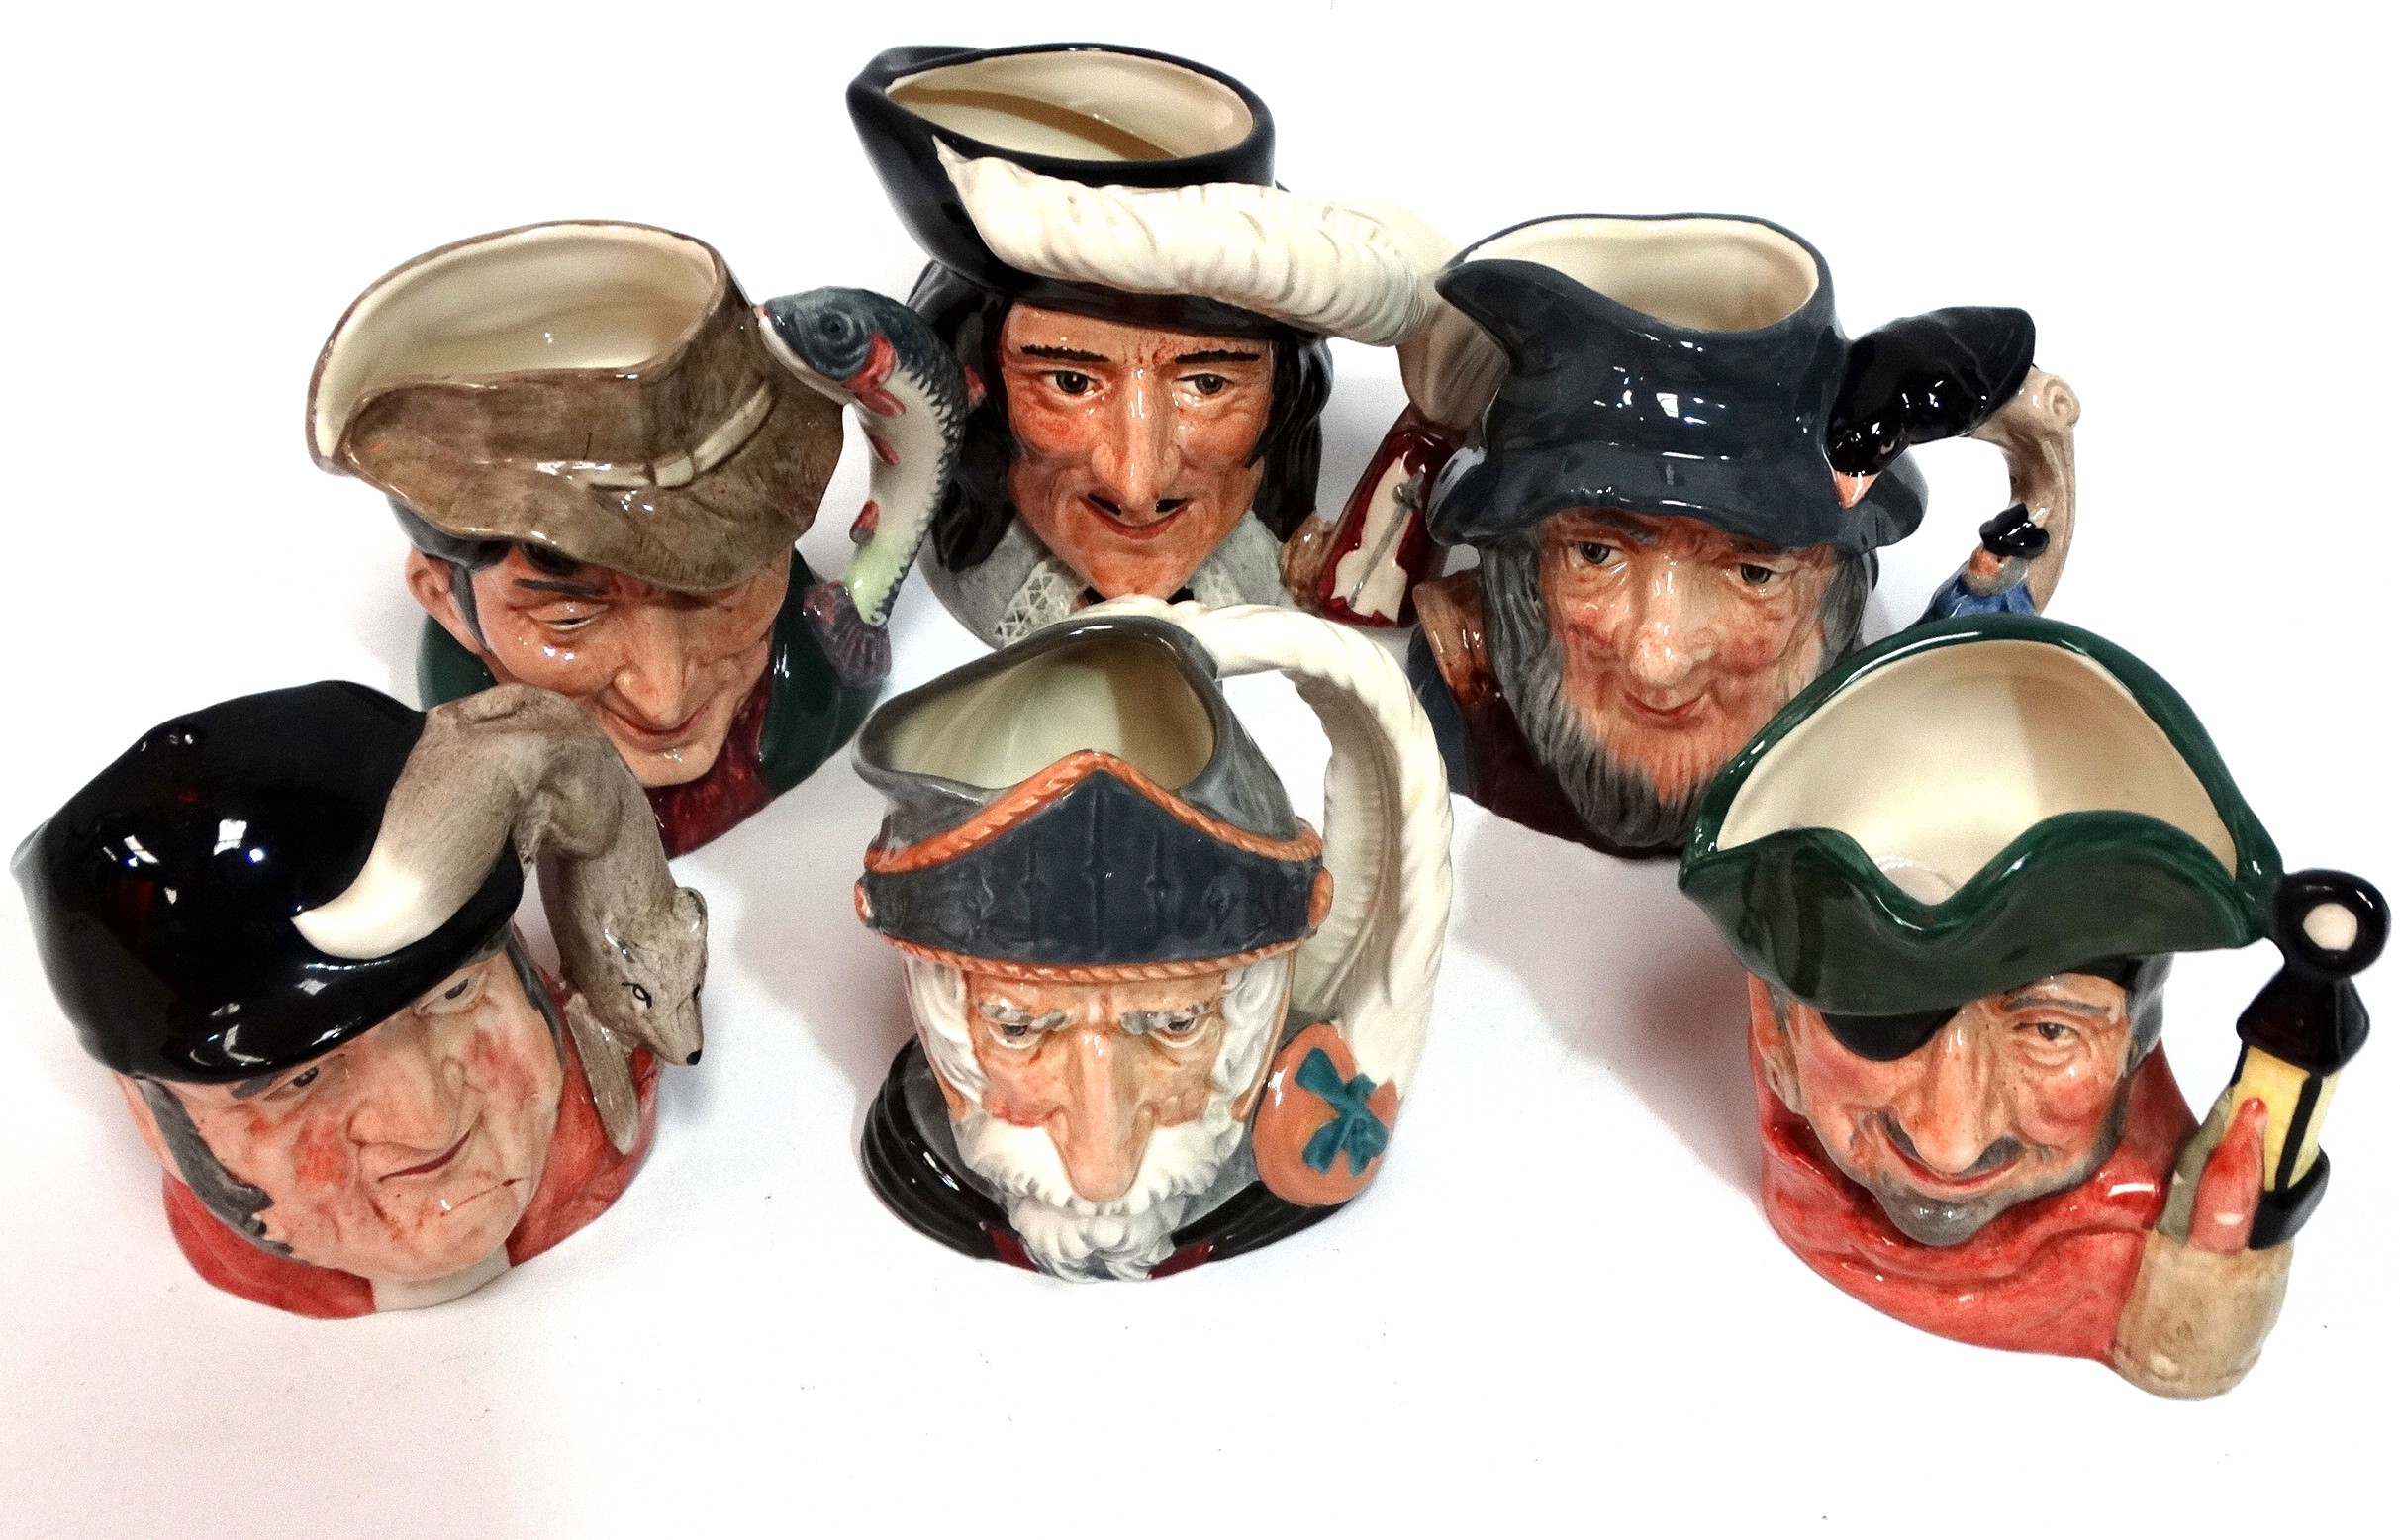 A small Royal Doulton character jug - The Smuggler, height 10cm, together with Gone Away, The